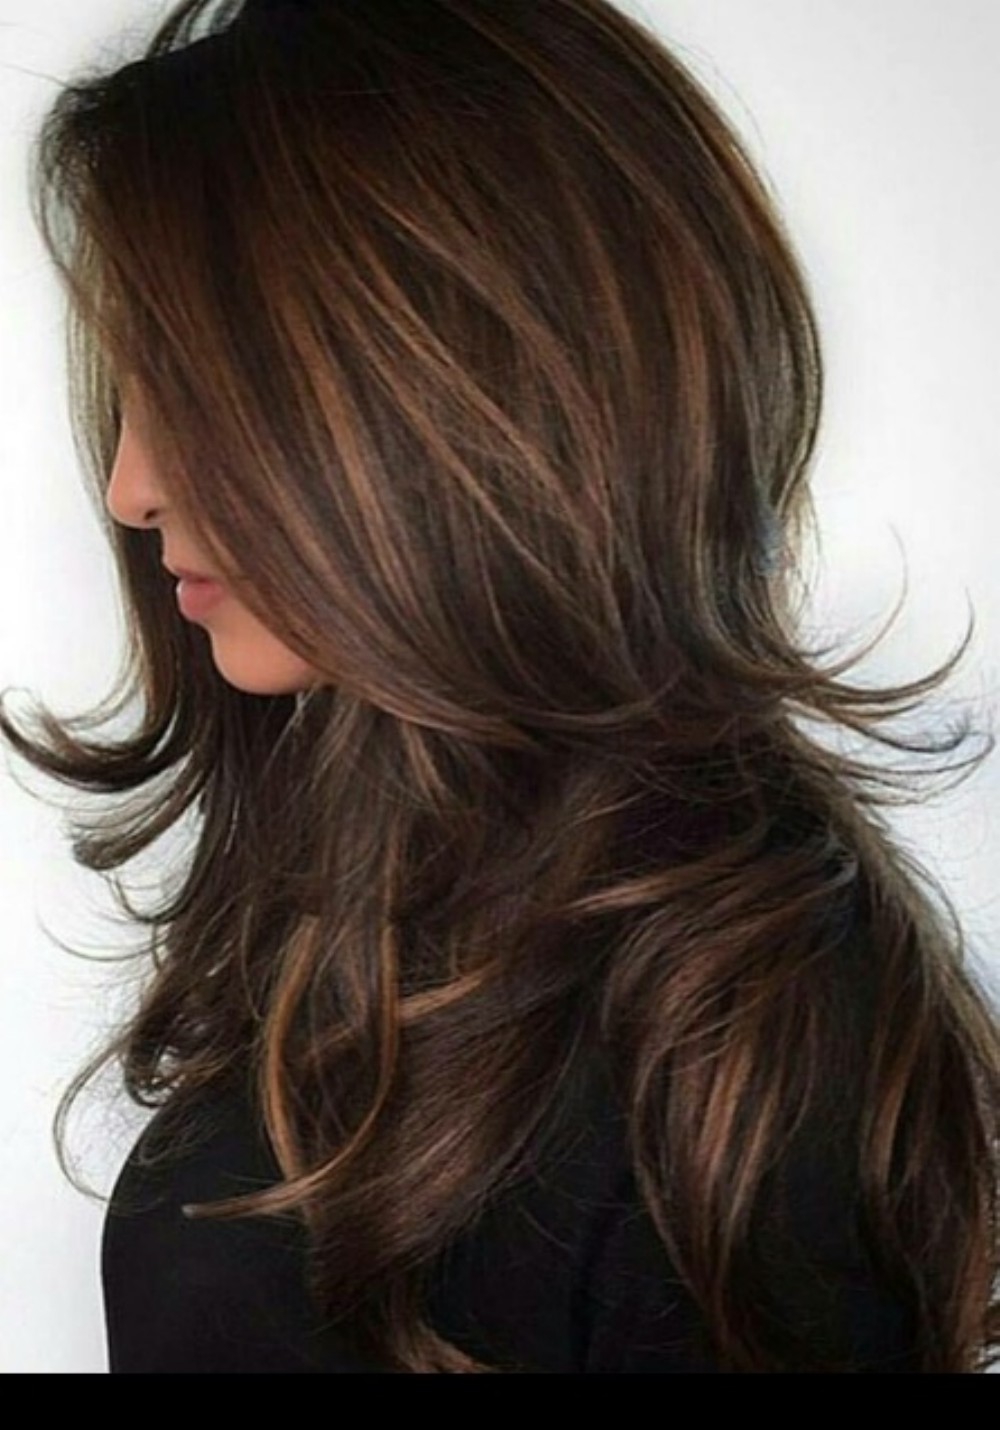 Best Layered Hairstyles for Women You Can Try This Year - Pretty Designs